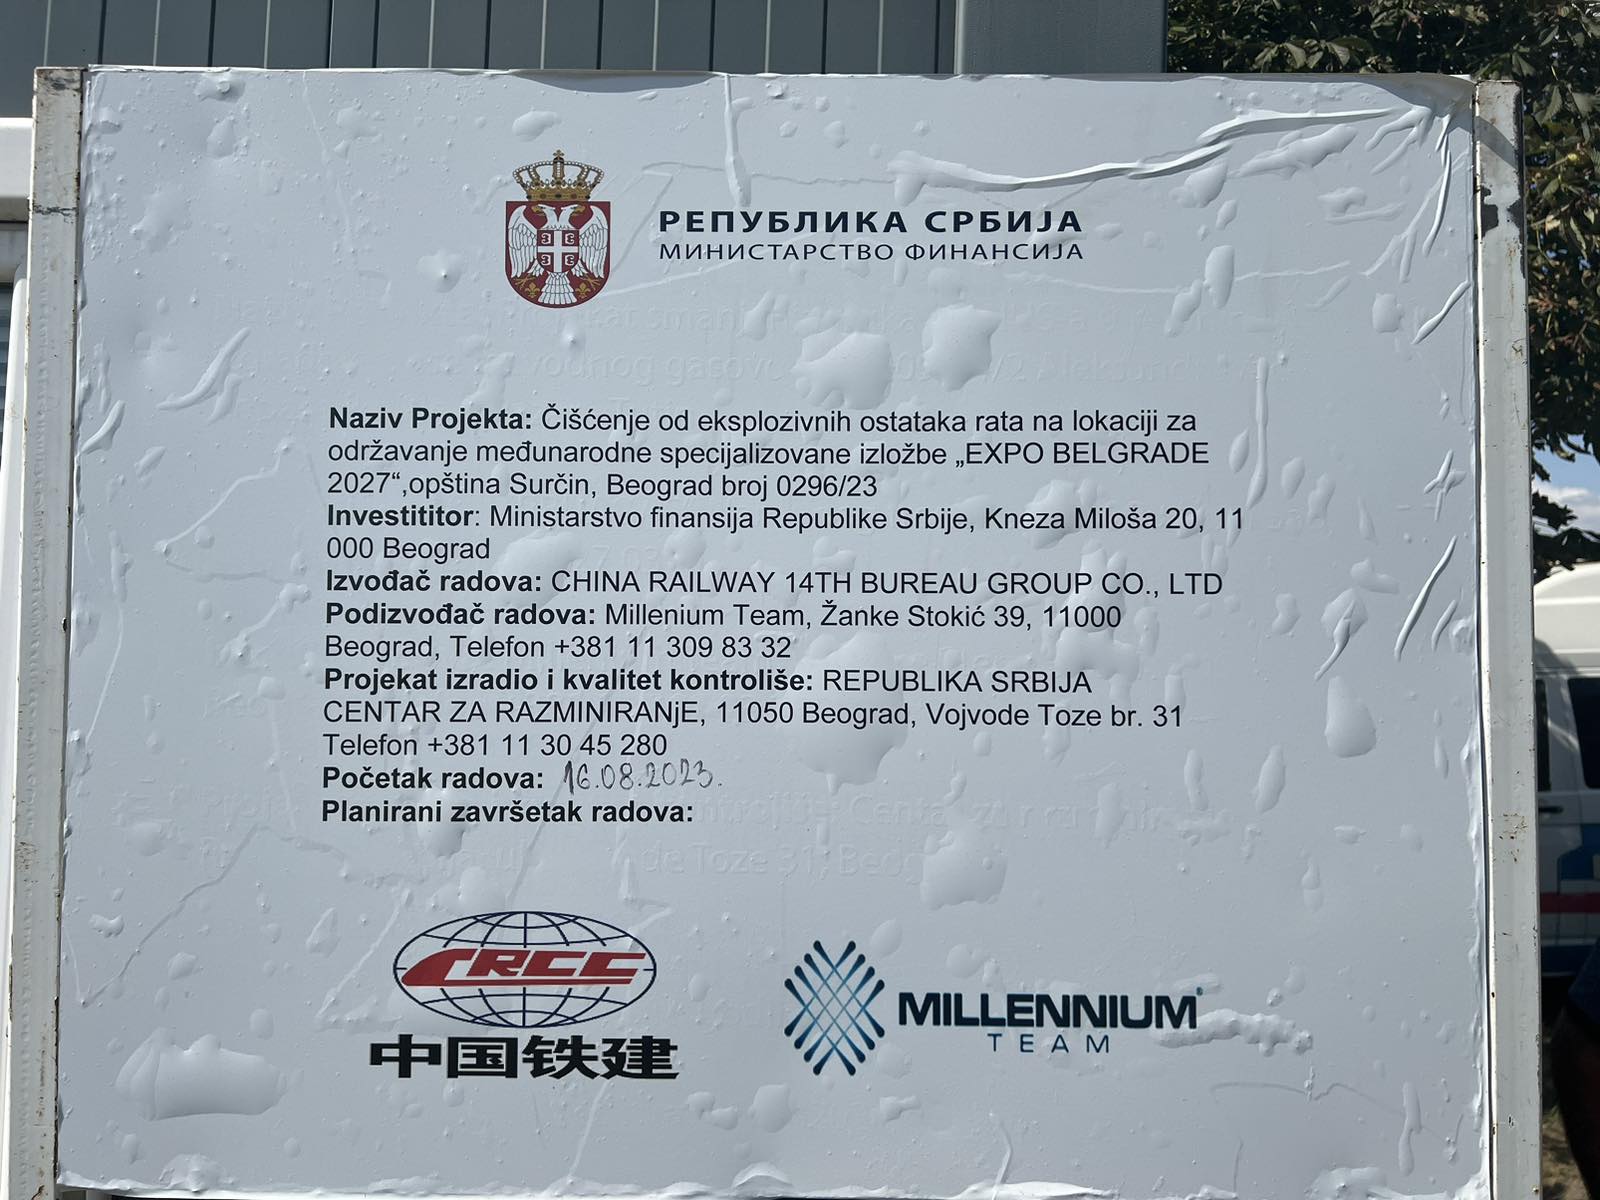 Implementation of ERW Clearance Project for Site  where  International Specialized Exhibition 'EXPO BELGRADE 2027' will be held